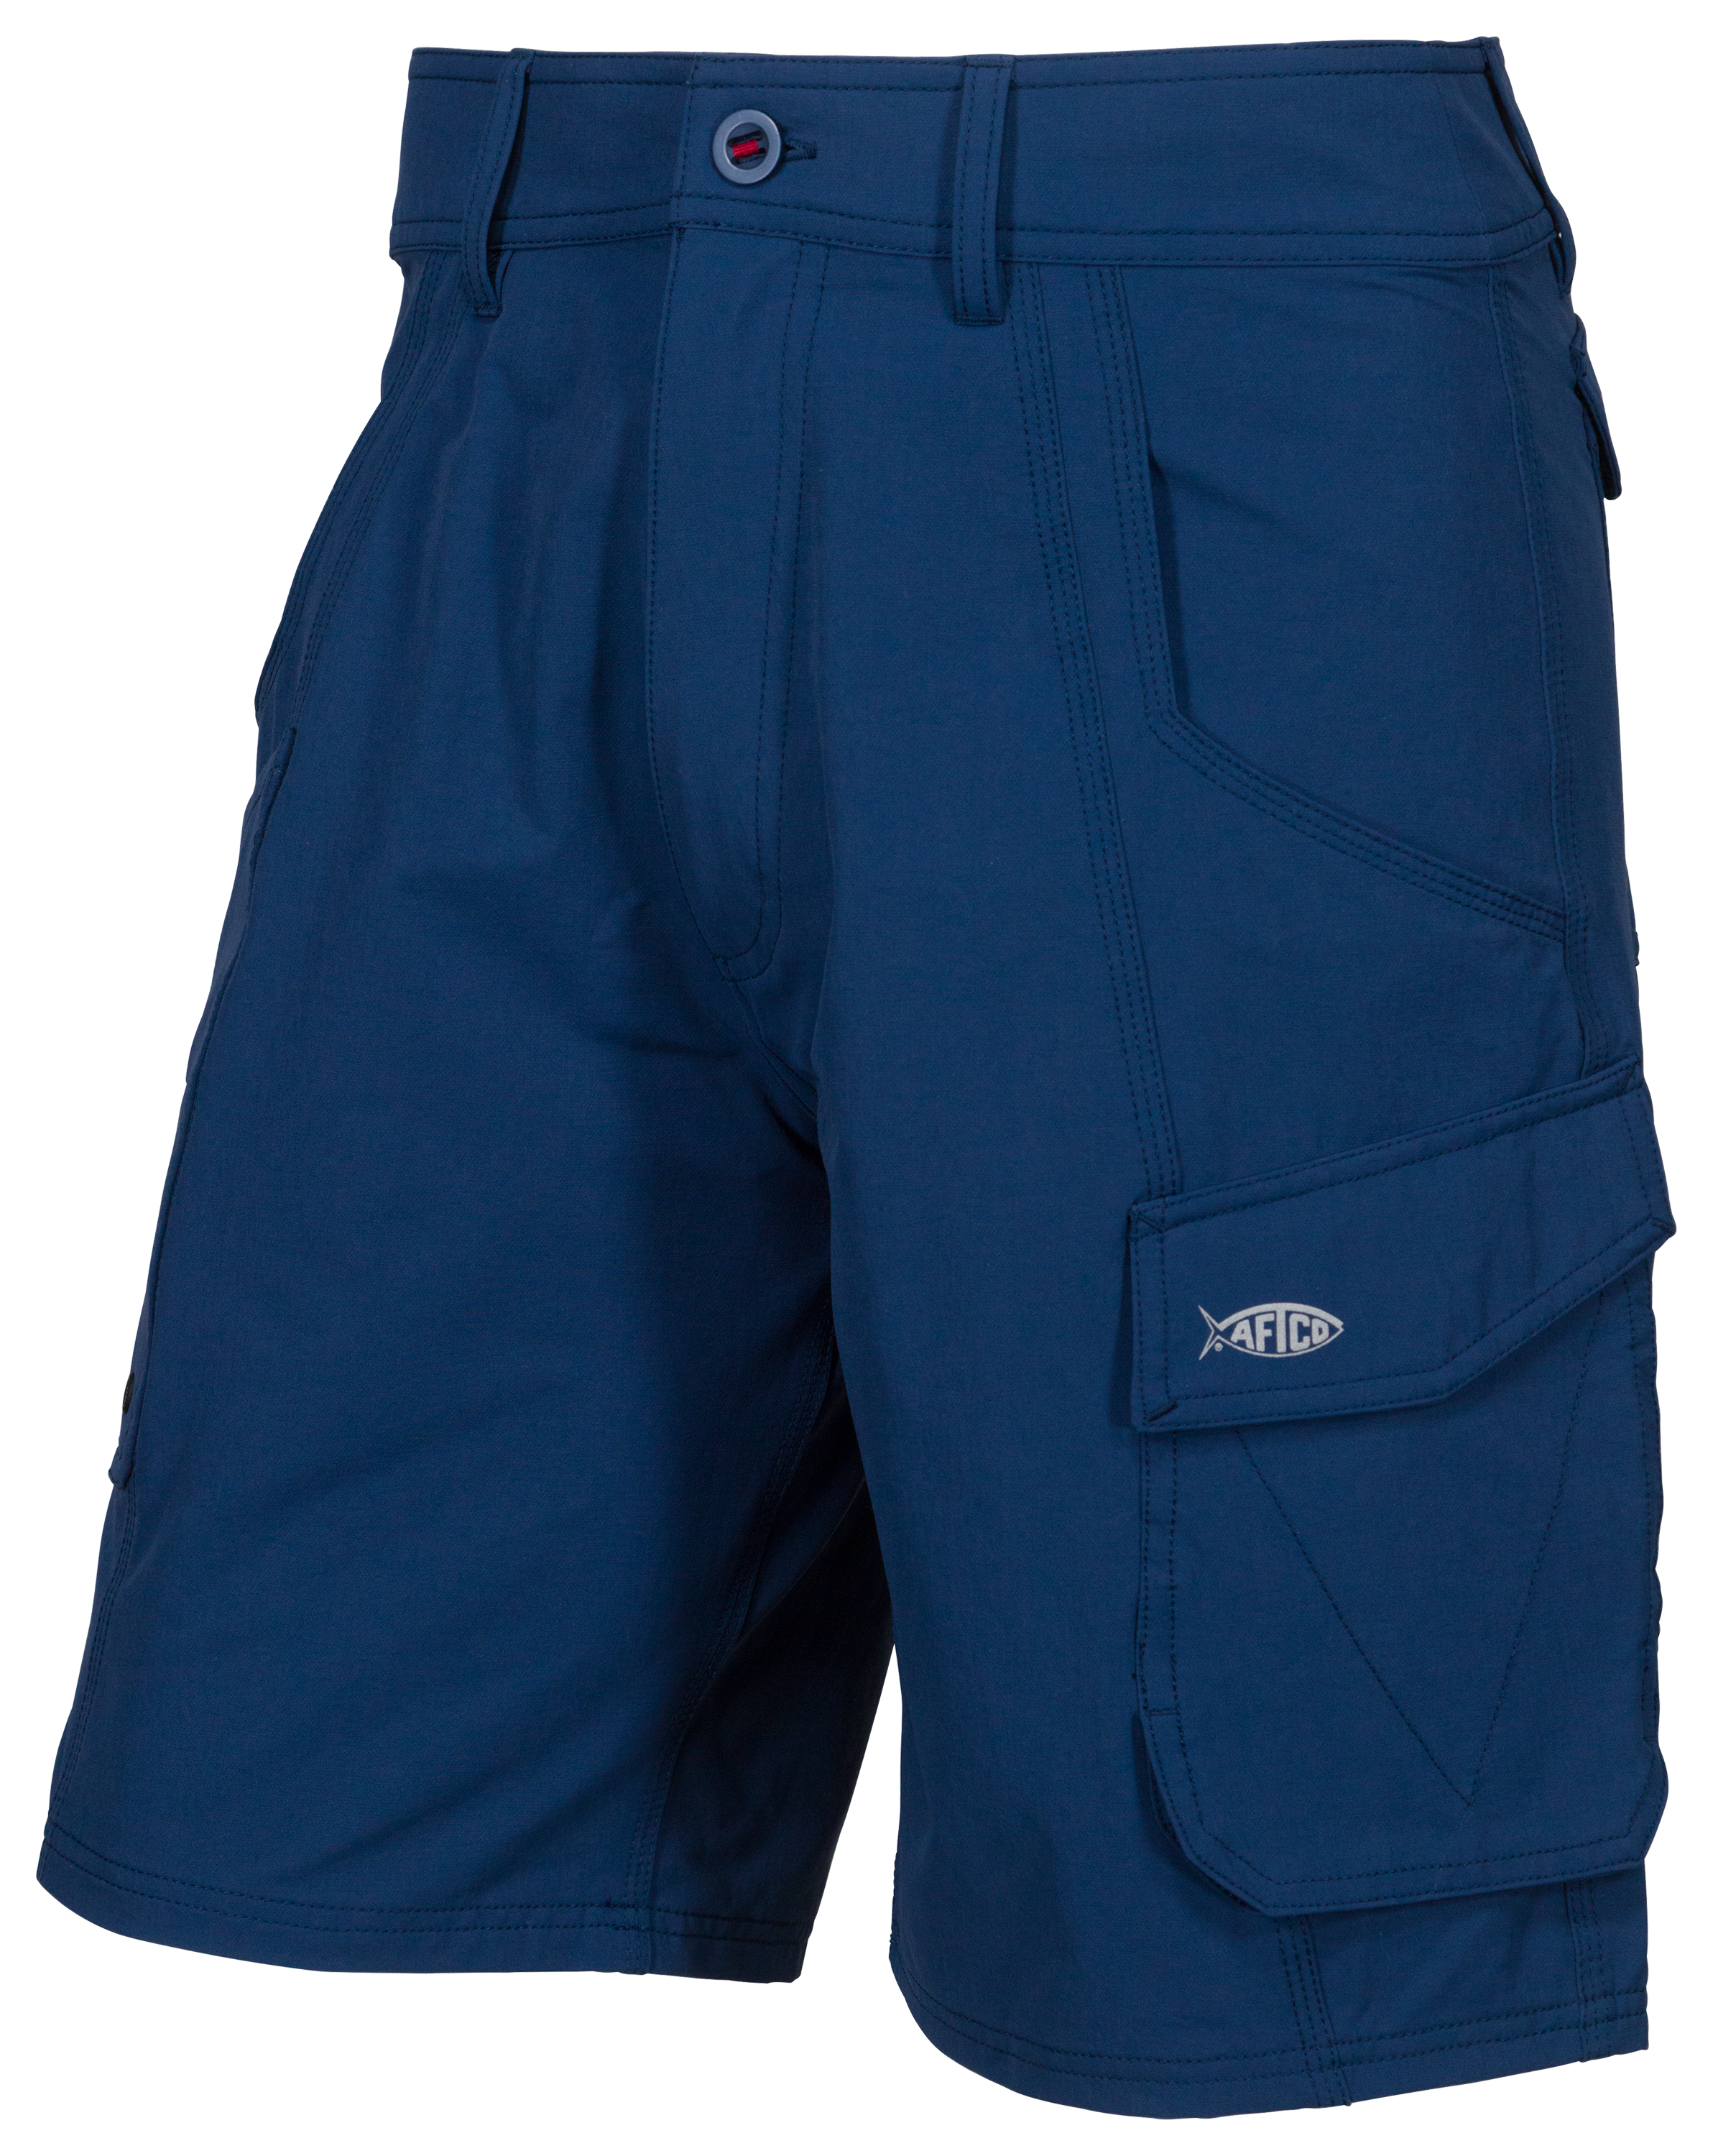  Aftco Stealth Fishing Shorts